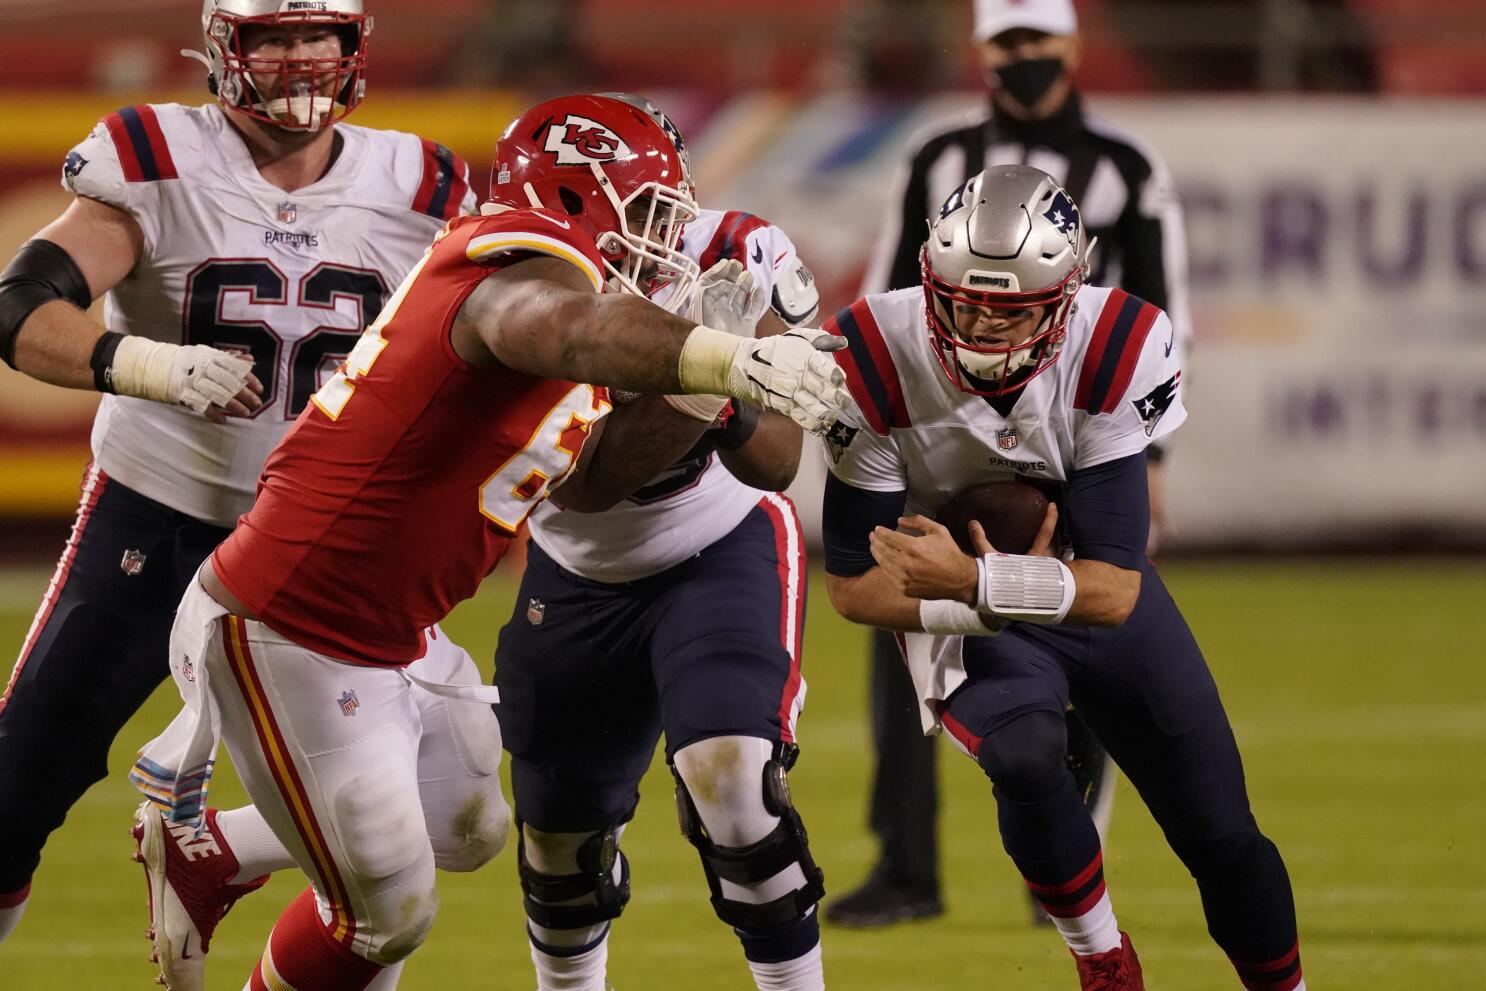 Chiefs Lean On Defense To Beat Pats 26-10 In COVID-19-Delayed Game